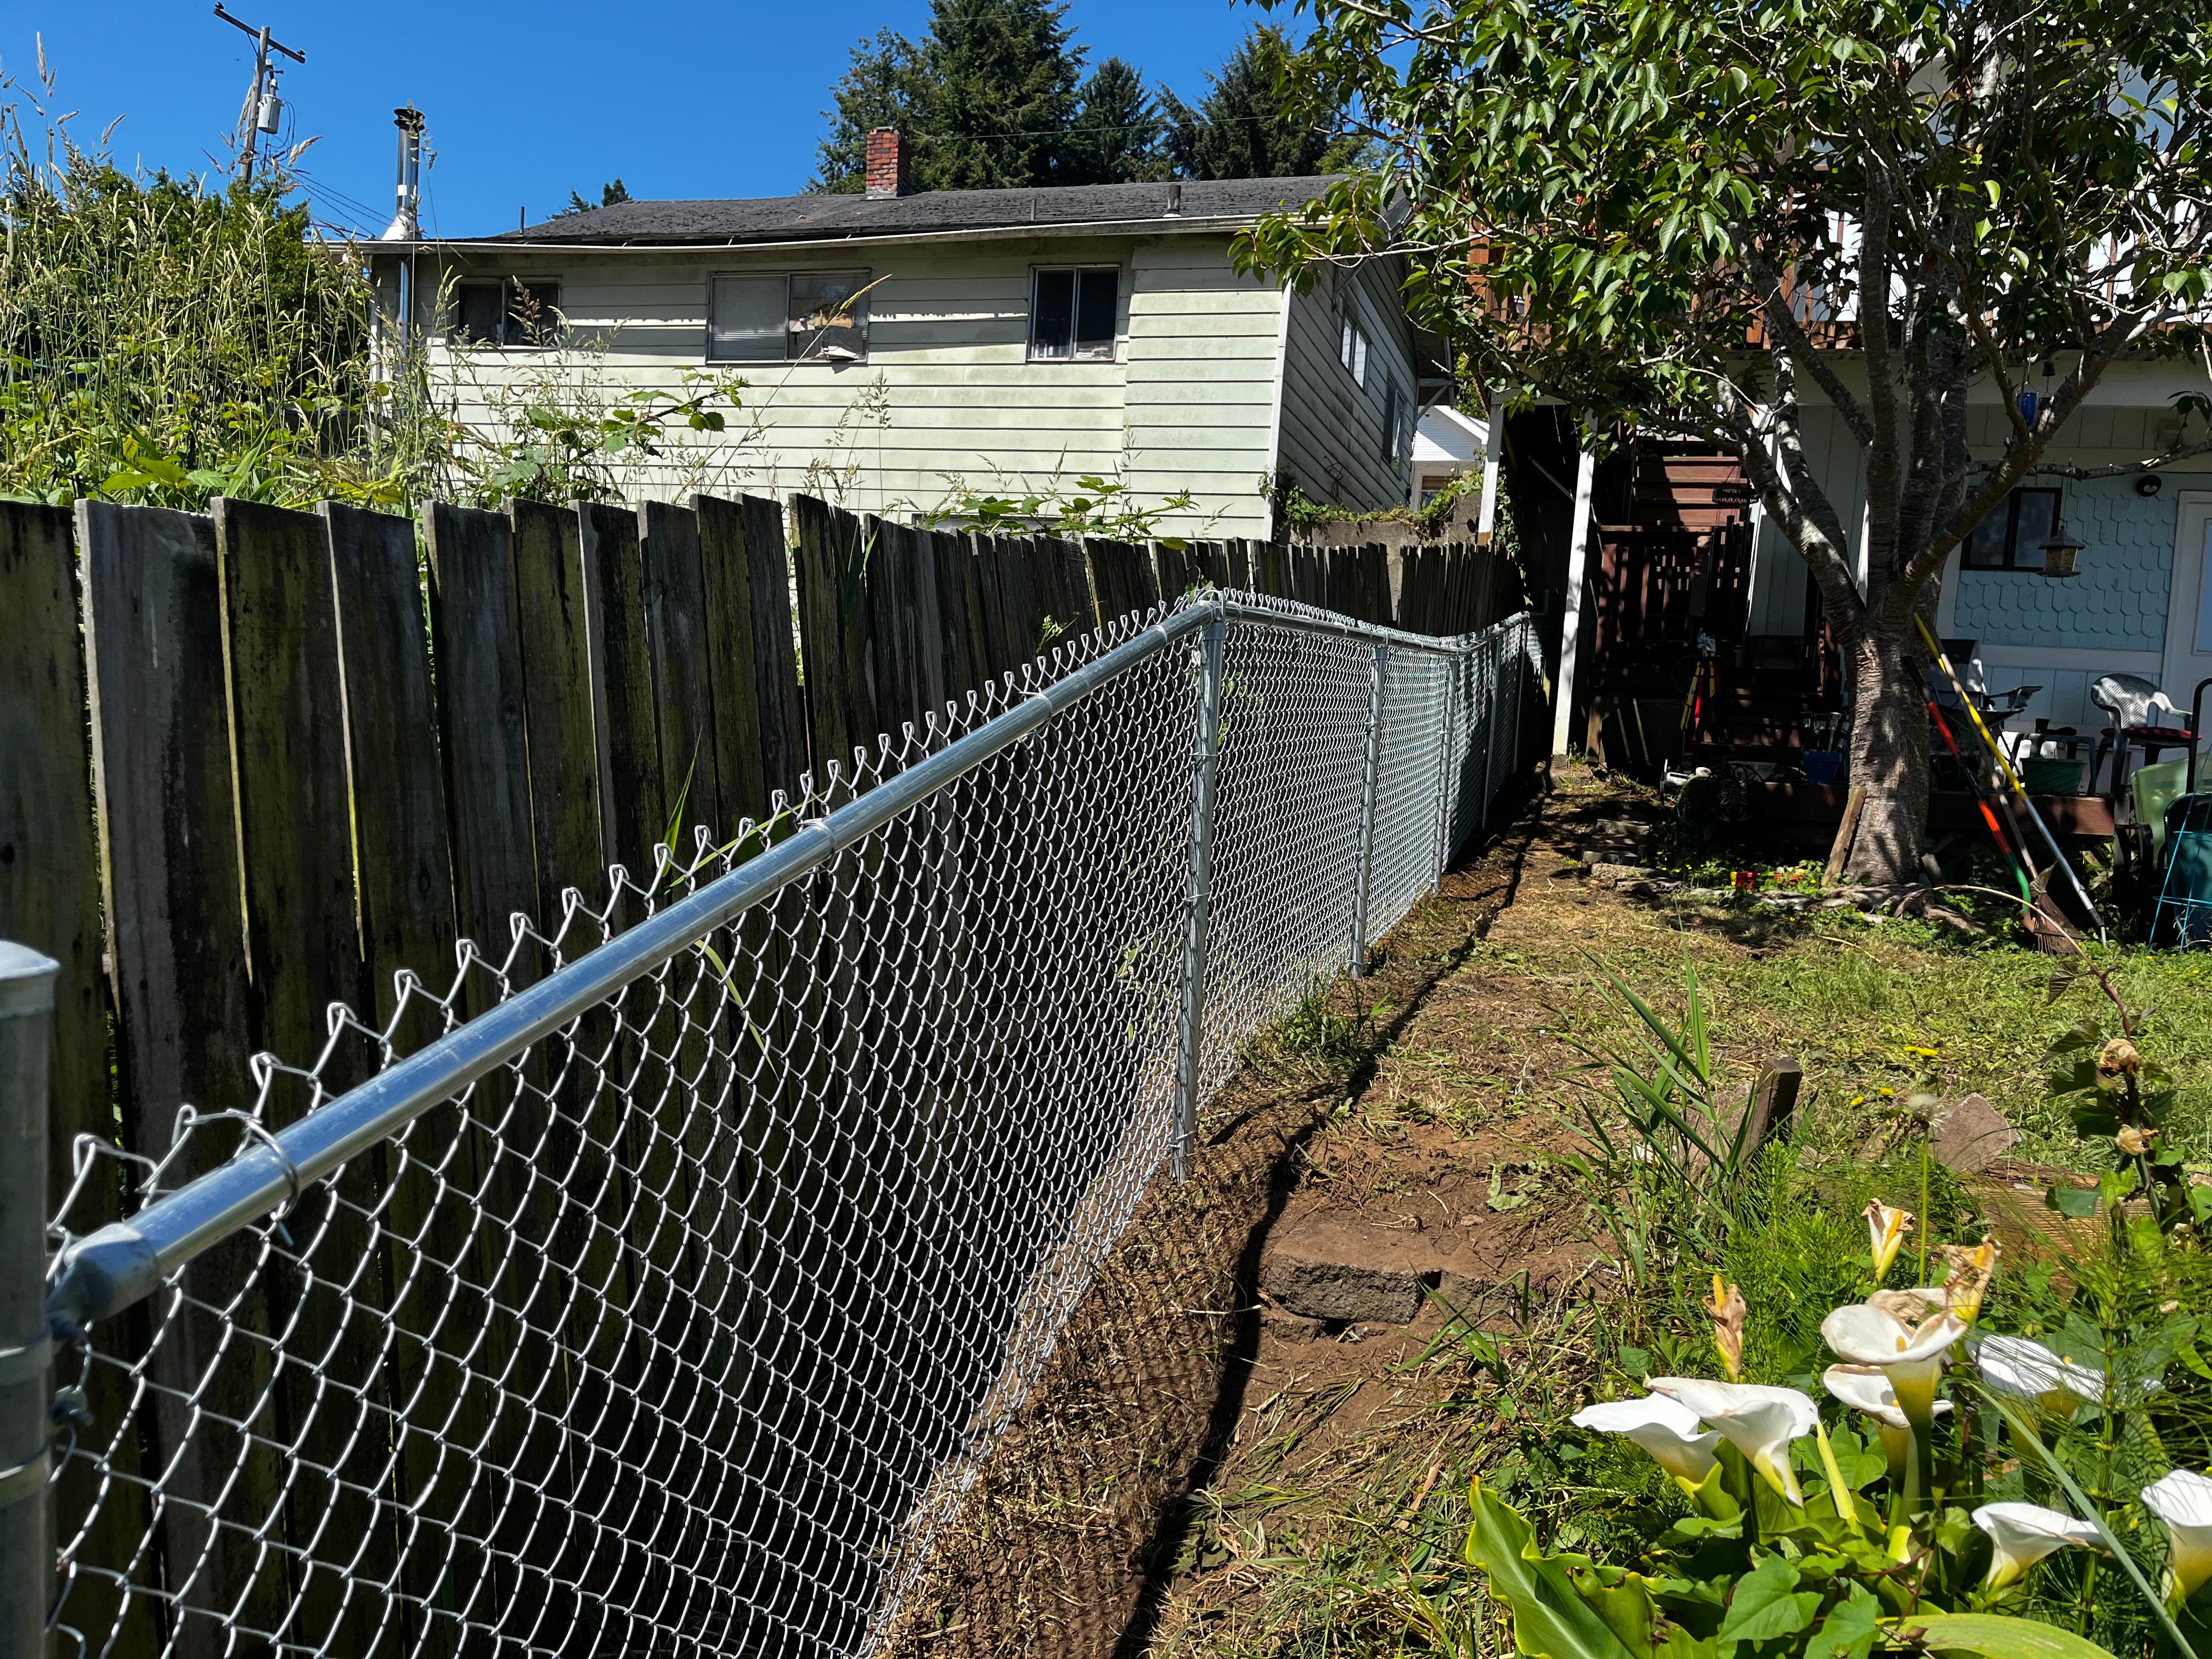 At Cleveland Fencing and Contracting, LLC, we specialize in a wide range of fencing options, from classic wooden fences to modern vinyl and metal designs.